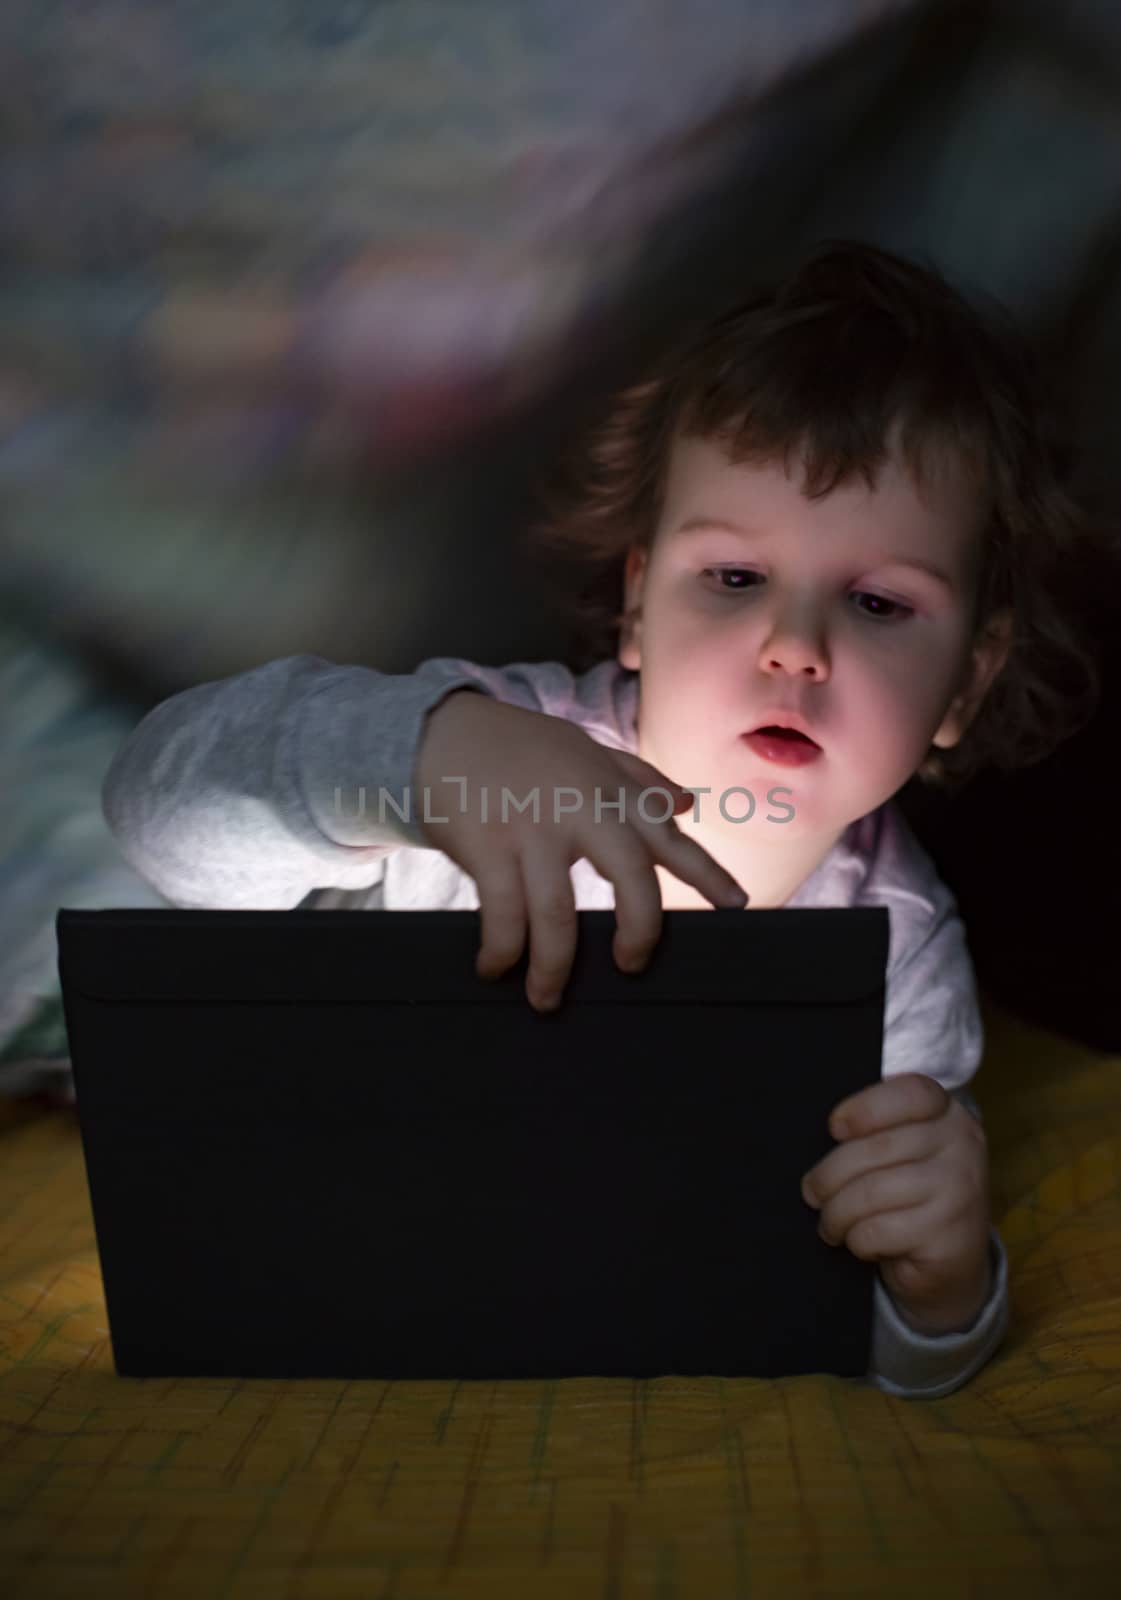 Little girl watching her tablet in the bed. Illuminated child fa by deyan_georgiev